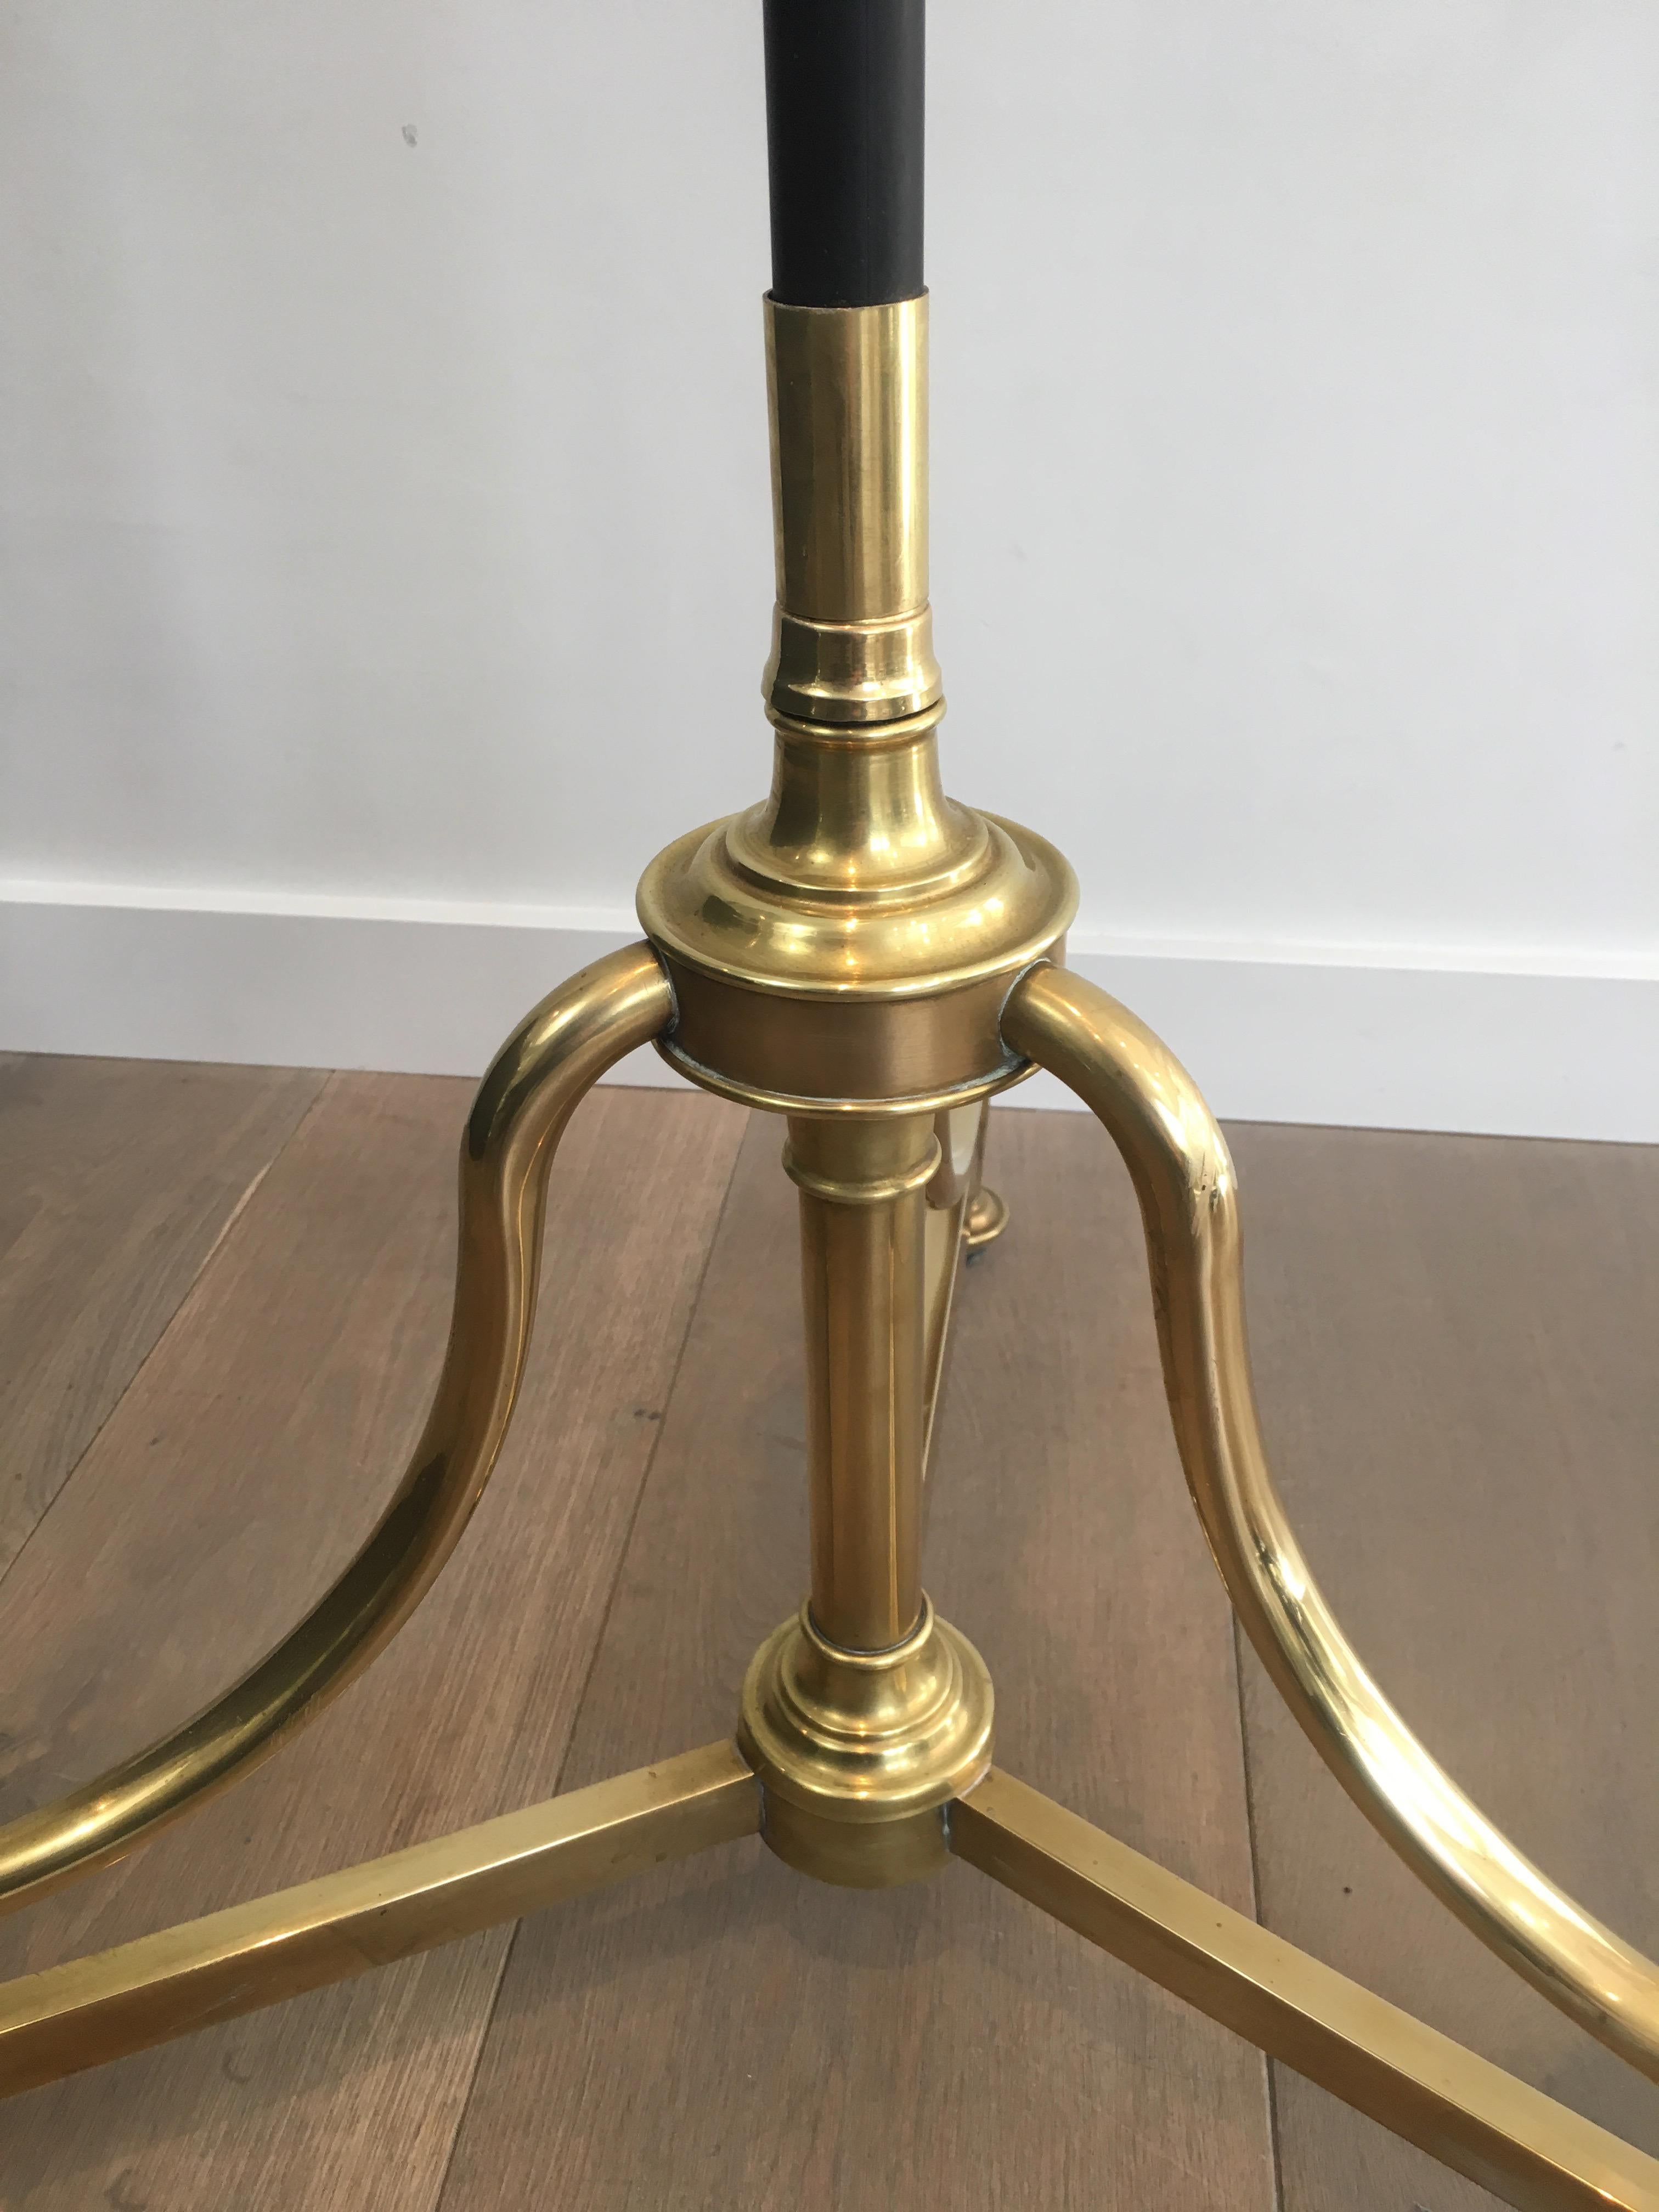 Unusual Tall Black Lacquered and Brass Coat and Hat Rack, French, circa 1900 For Sale 10